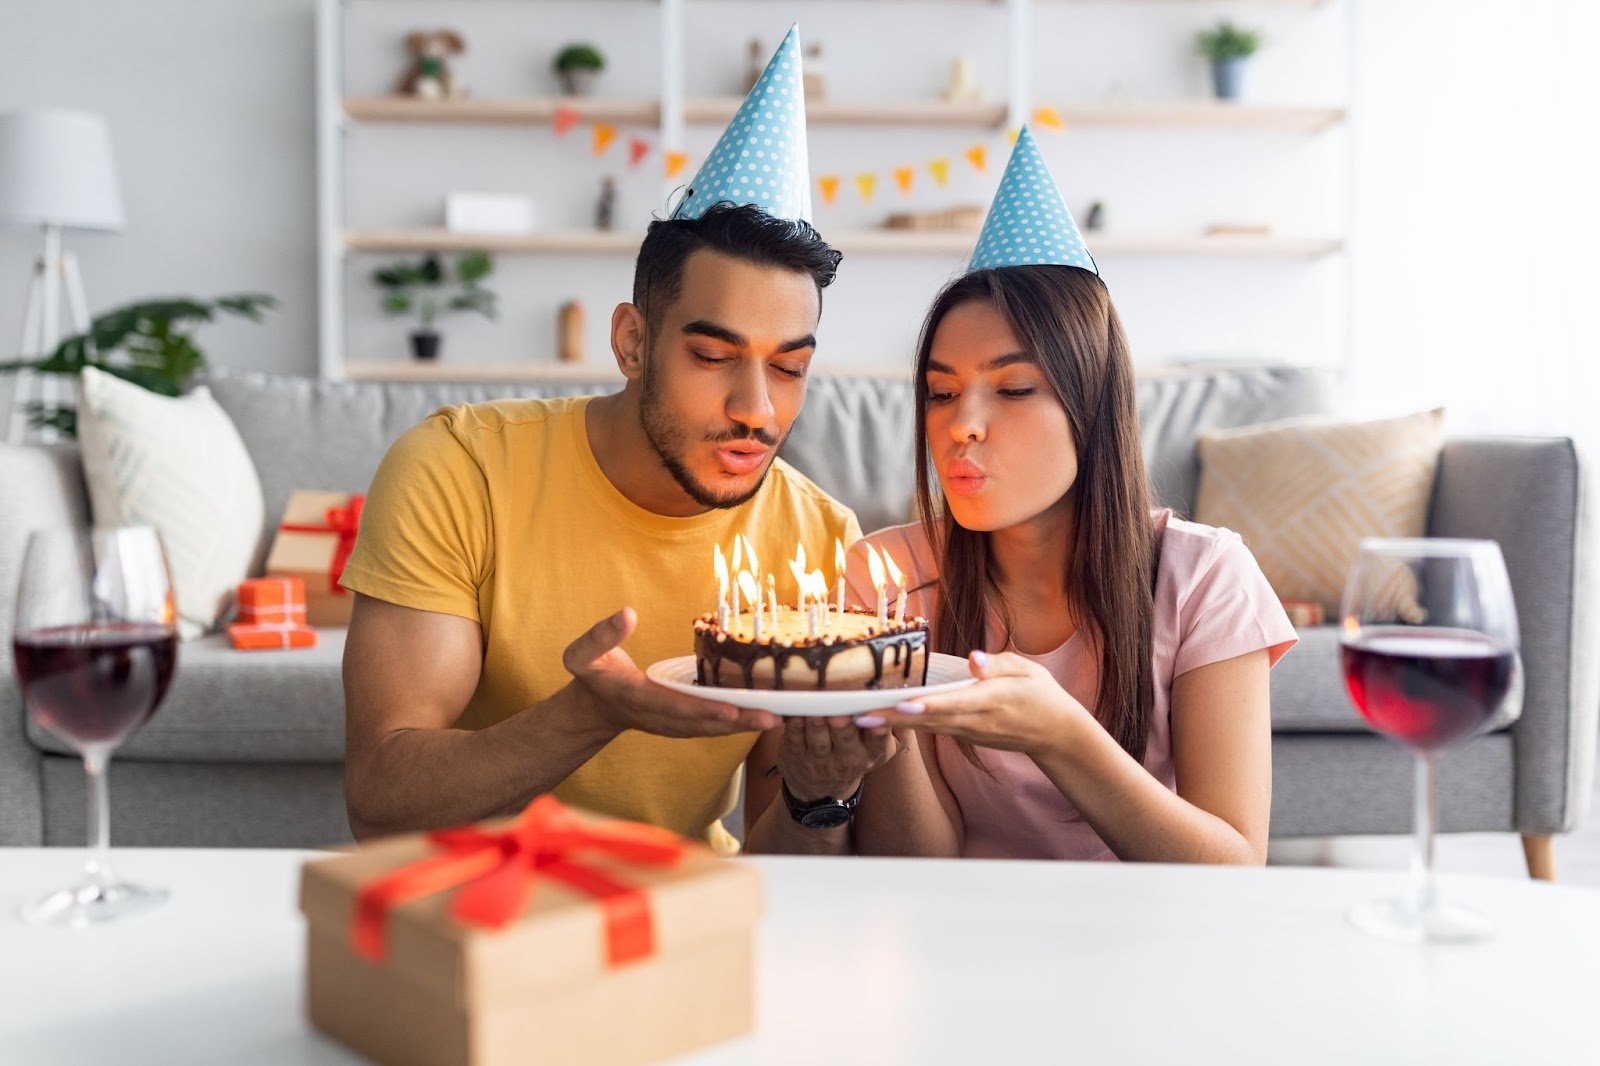 Cute Birthday Messages for Your Boyfriend That Will Make Him Cry